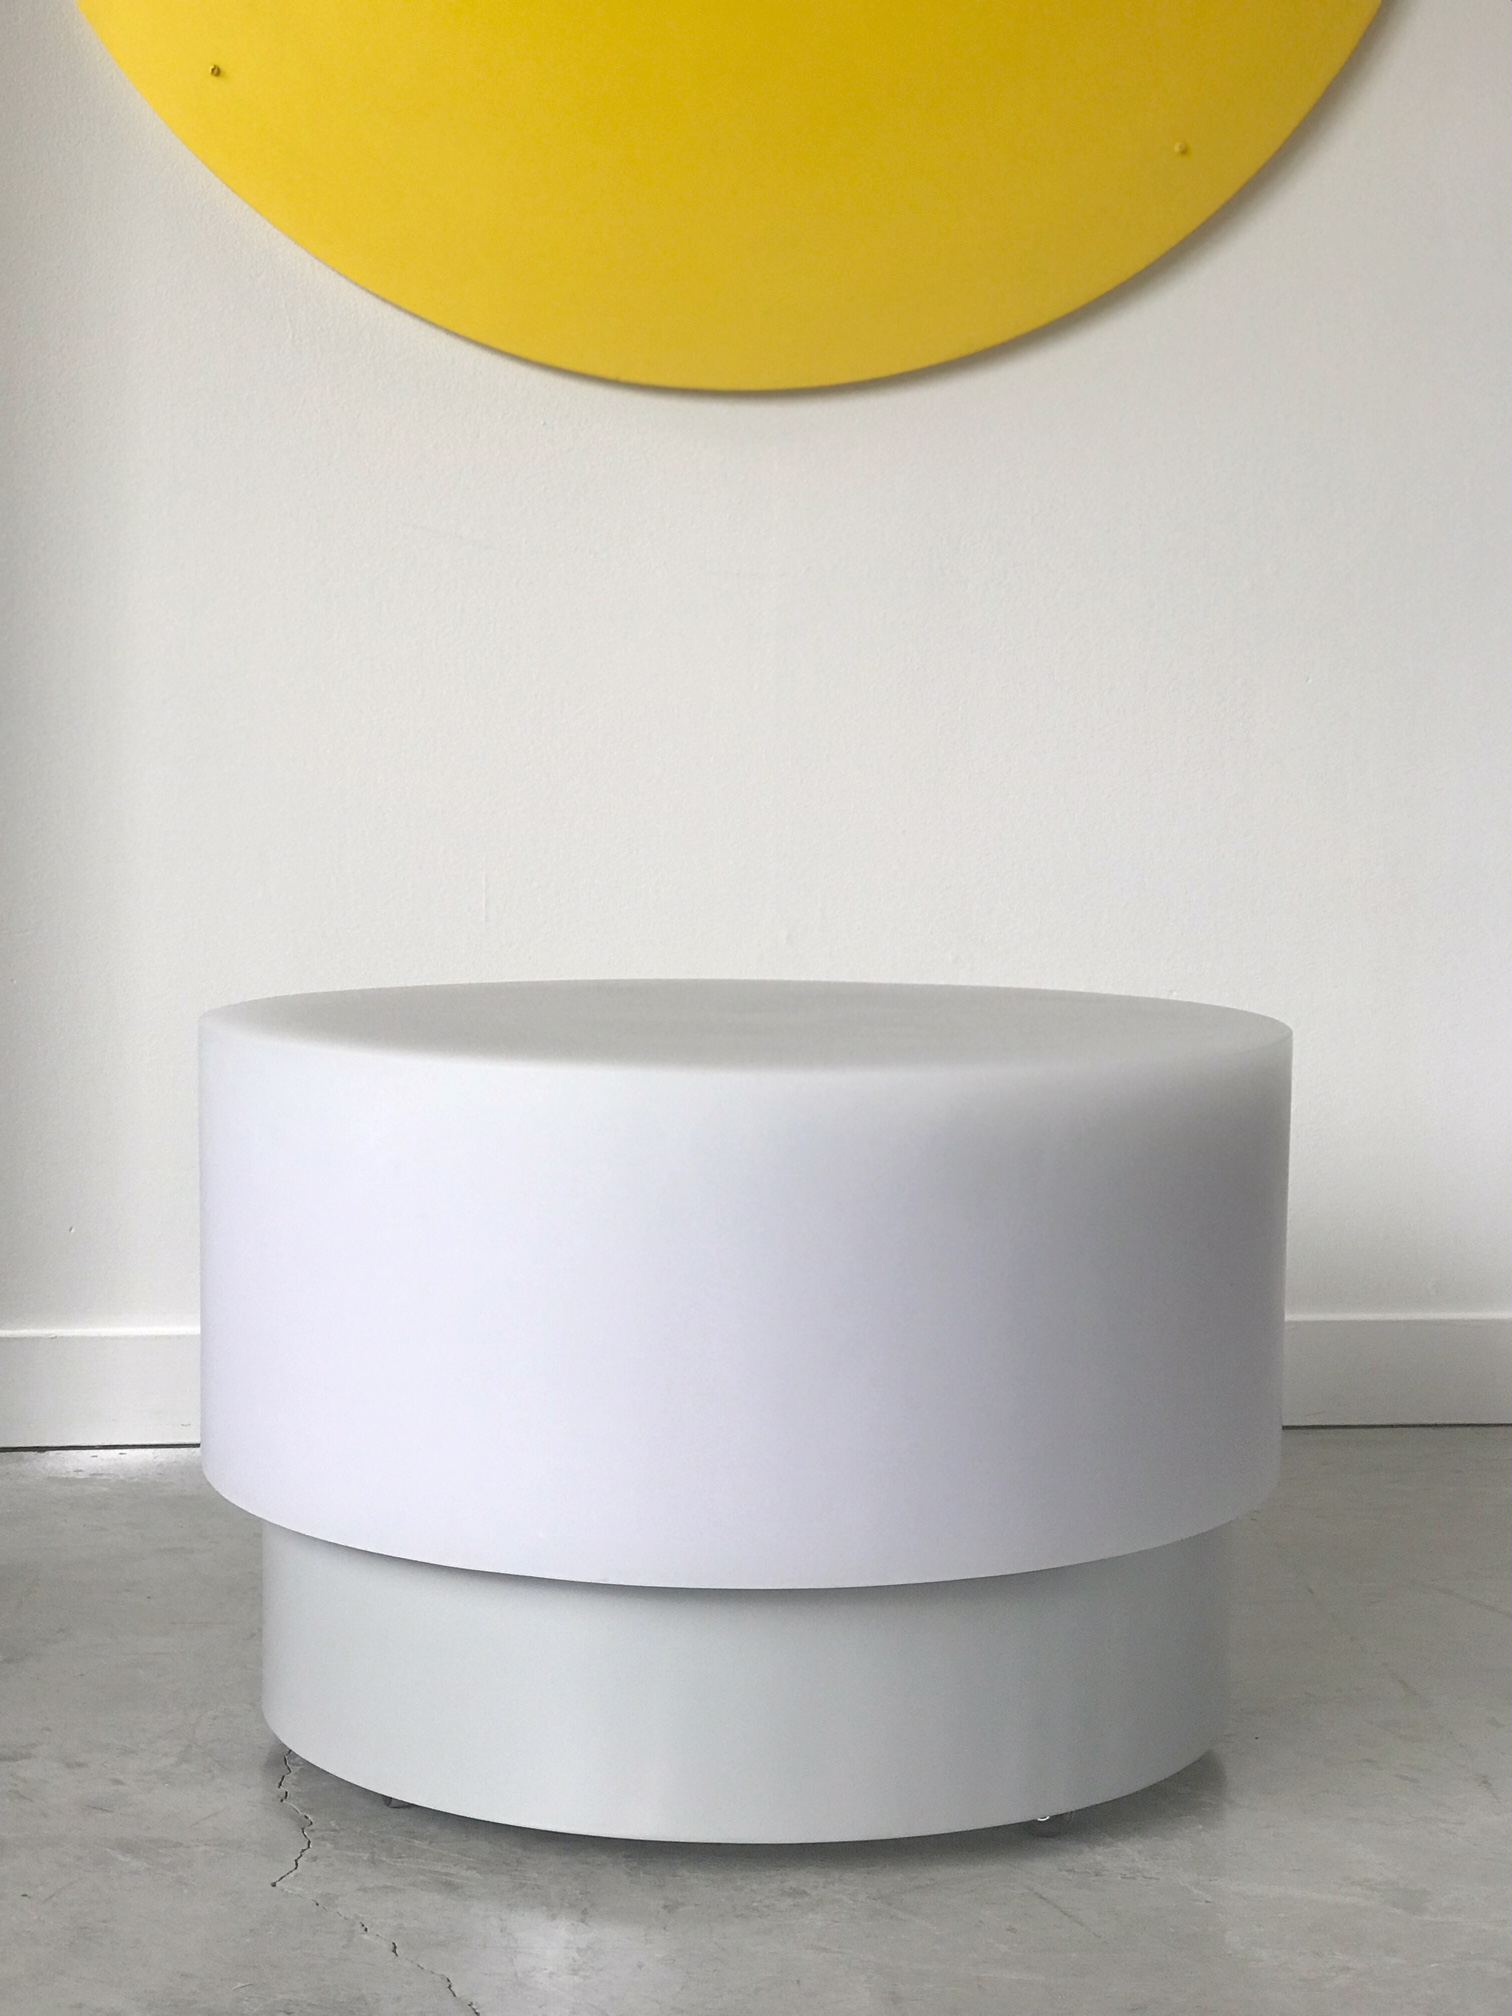 floating round resin coffee table with yellow wall accent